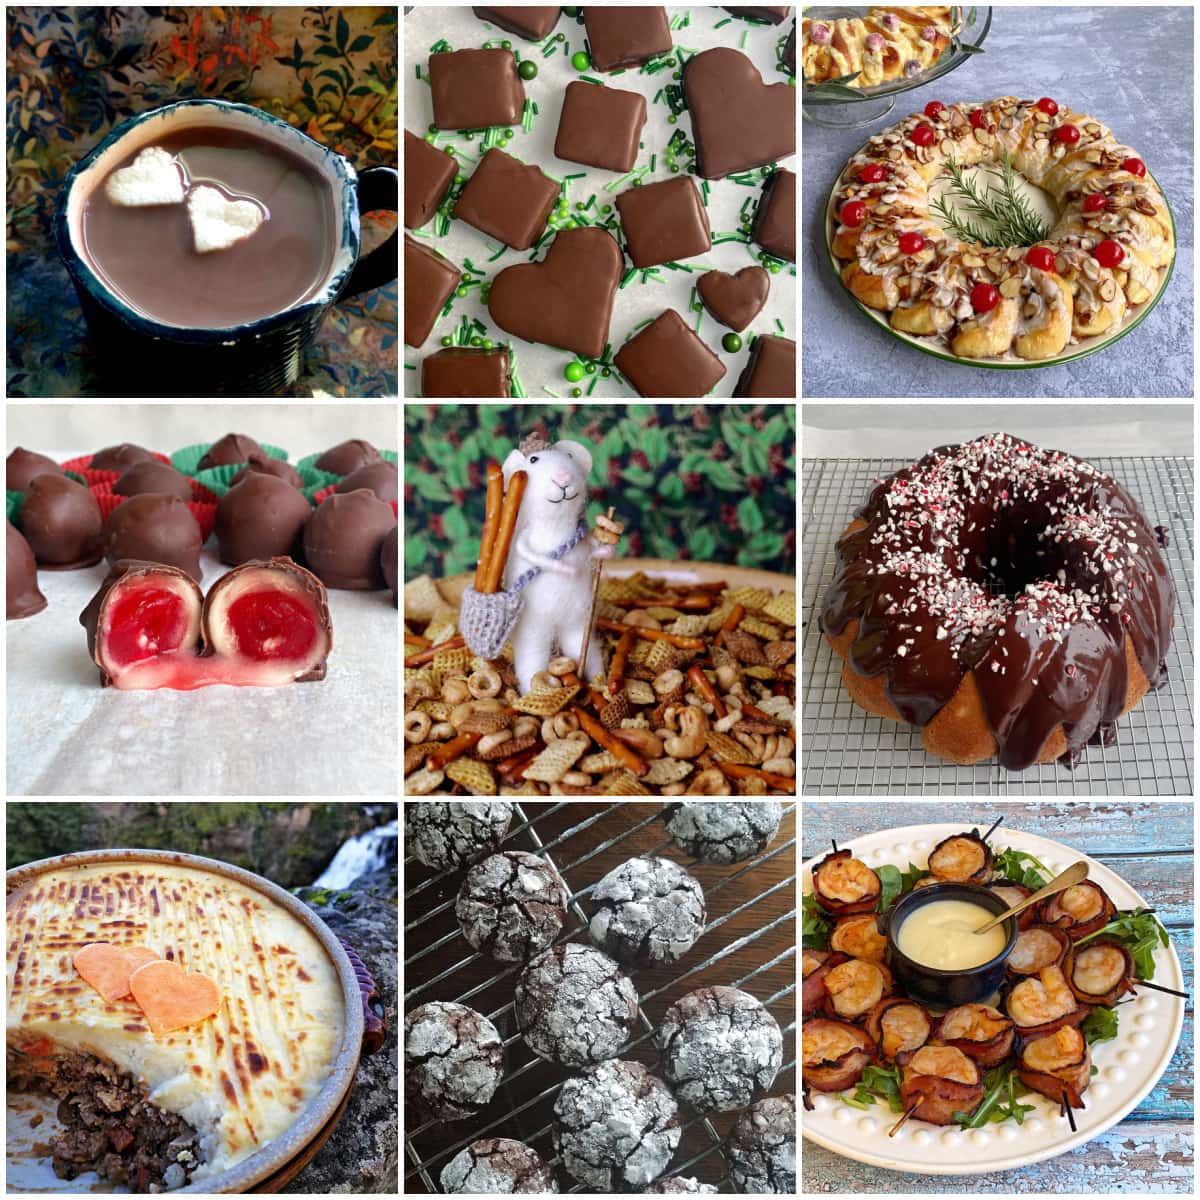 9-panel collage showing images of food and recipes from December Food Holidays calendar.